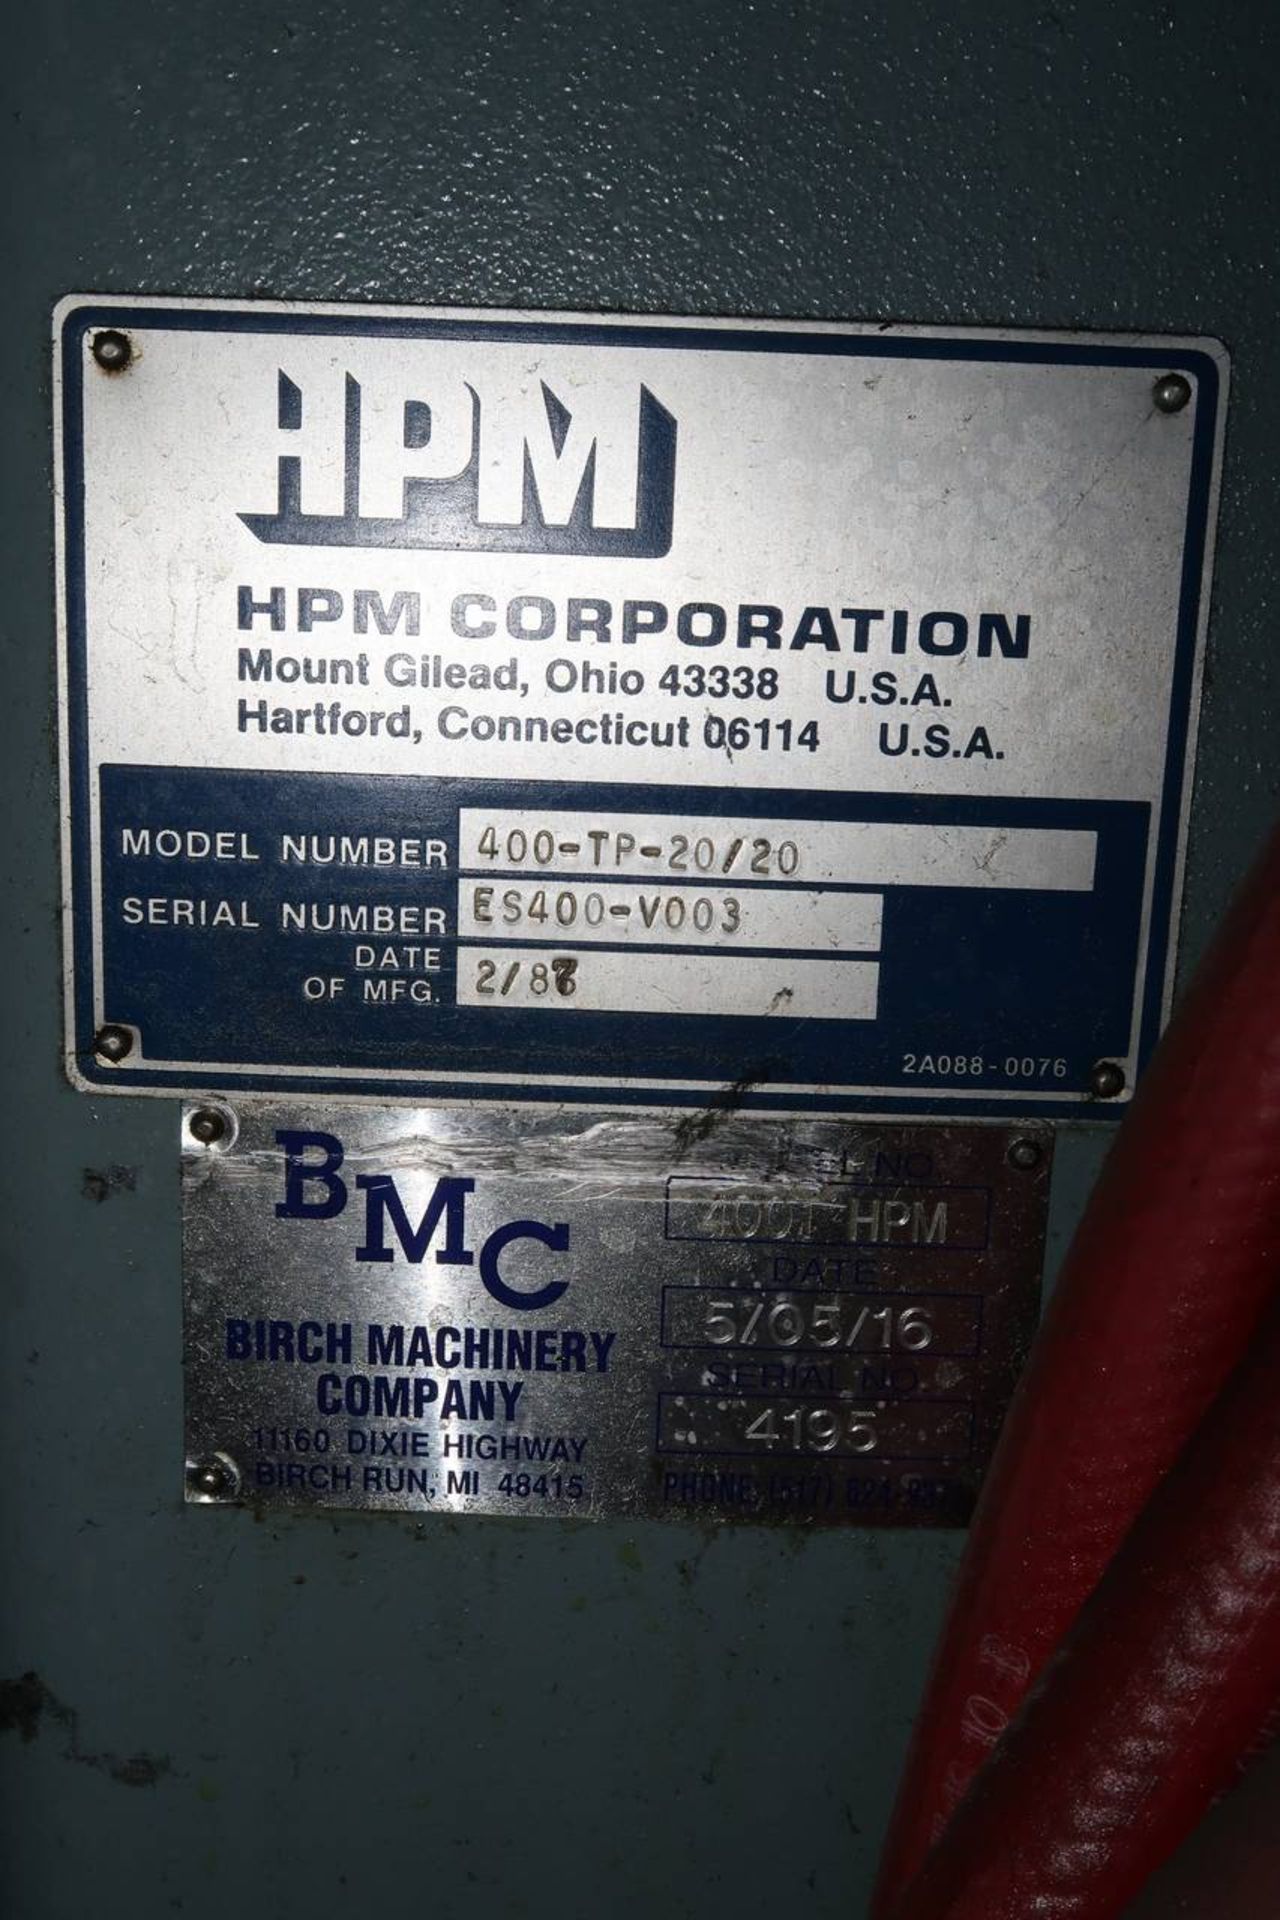 1987 HPM 400-TP-20 400-Ton Thermo Plastic Injection Molding Press - Image 22 of 38